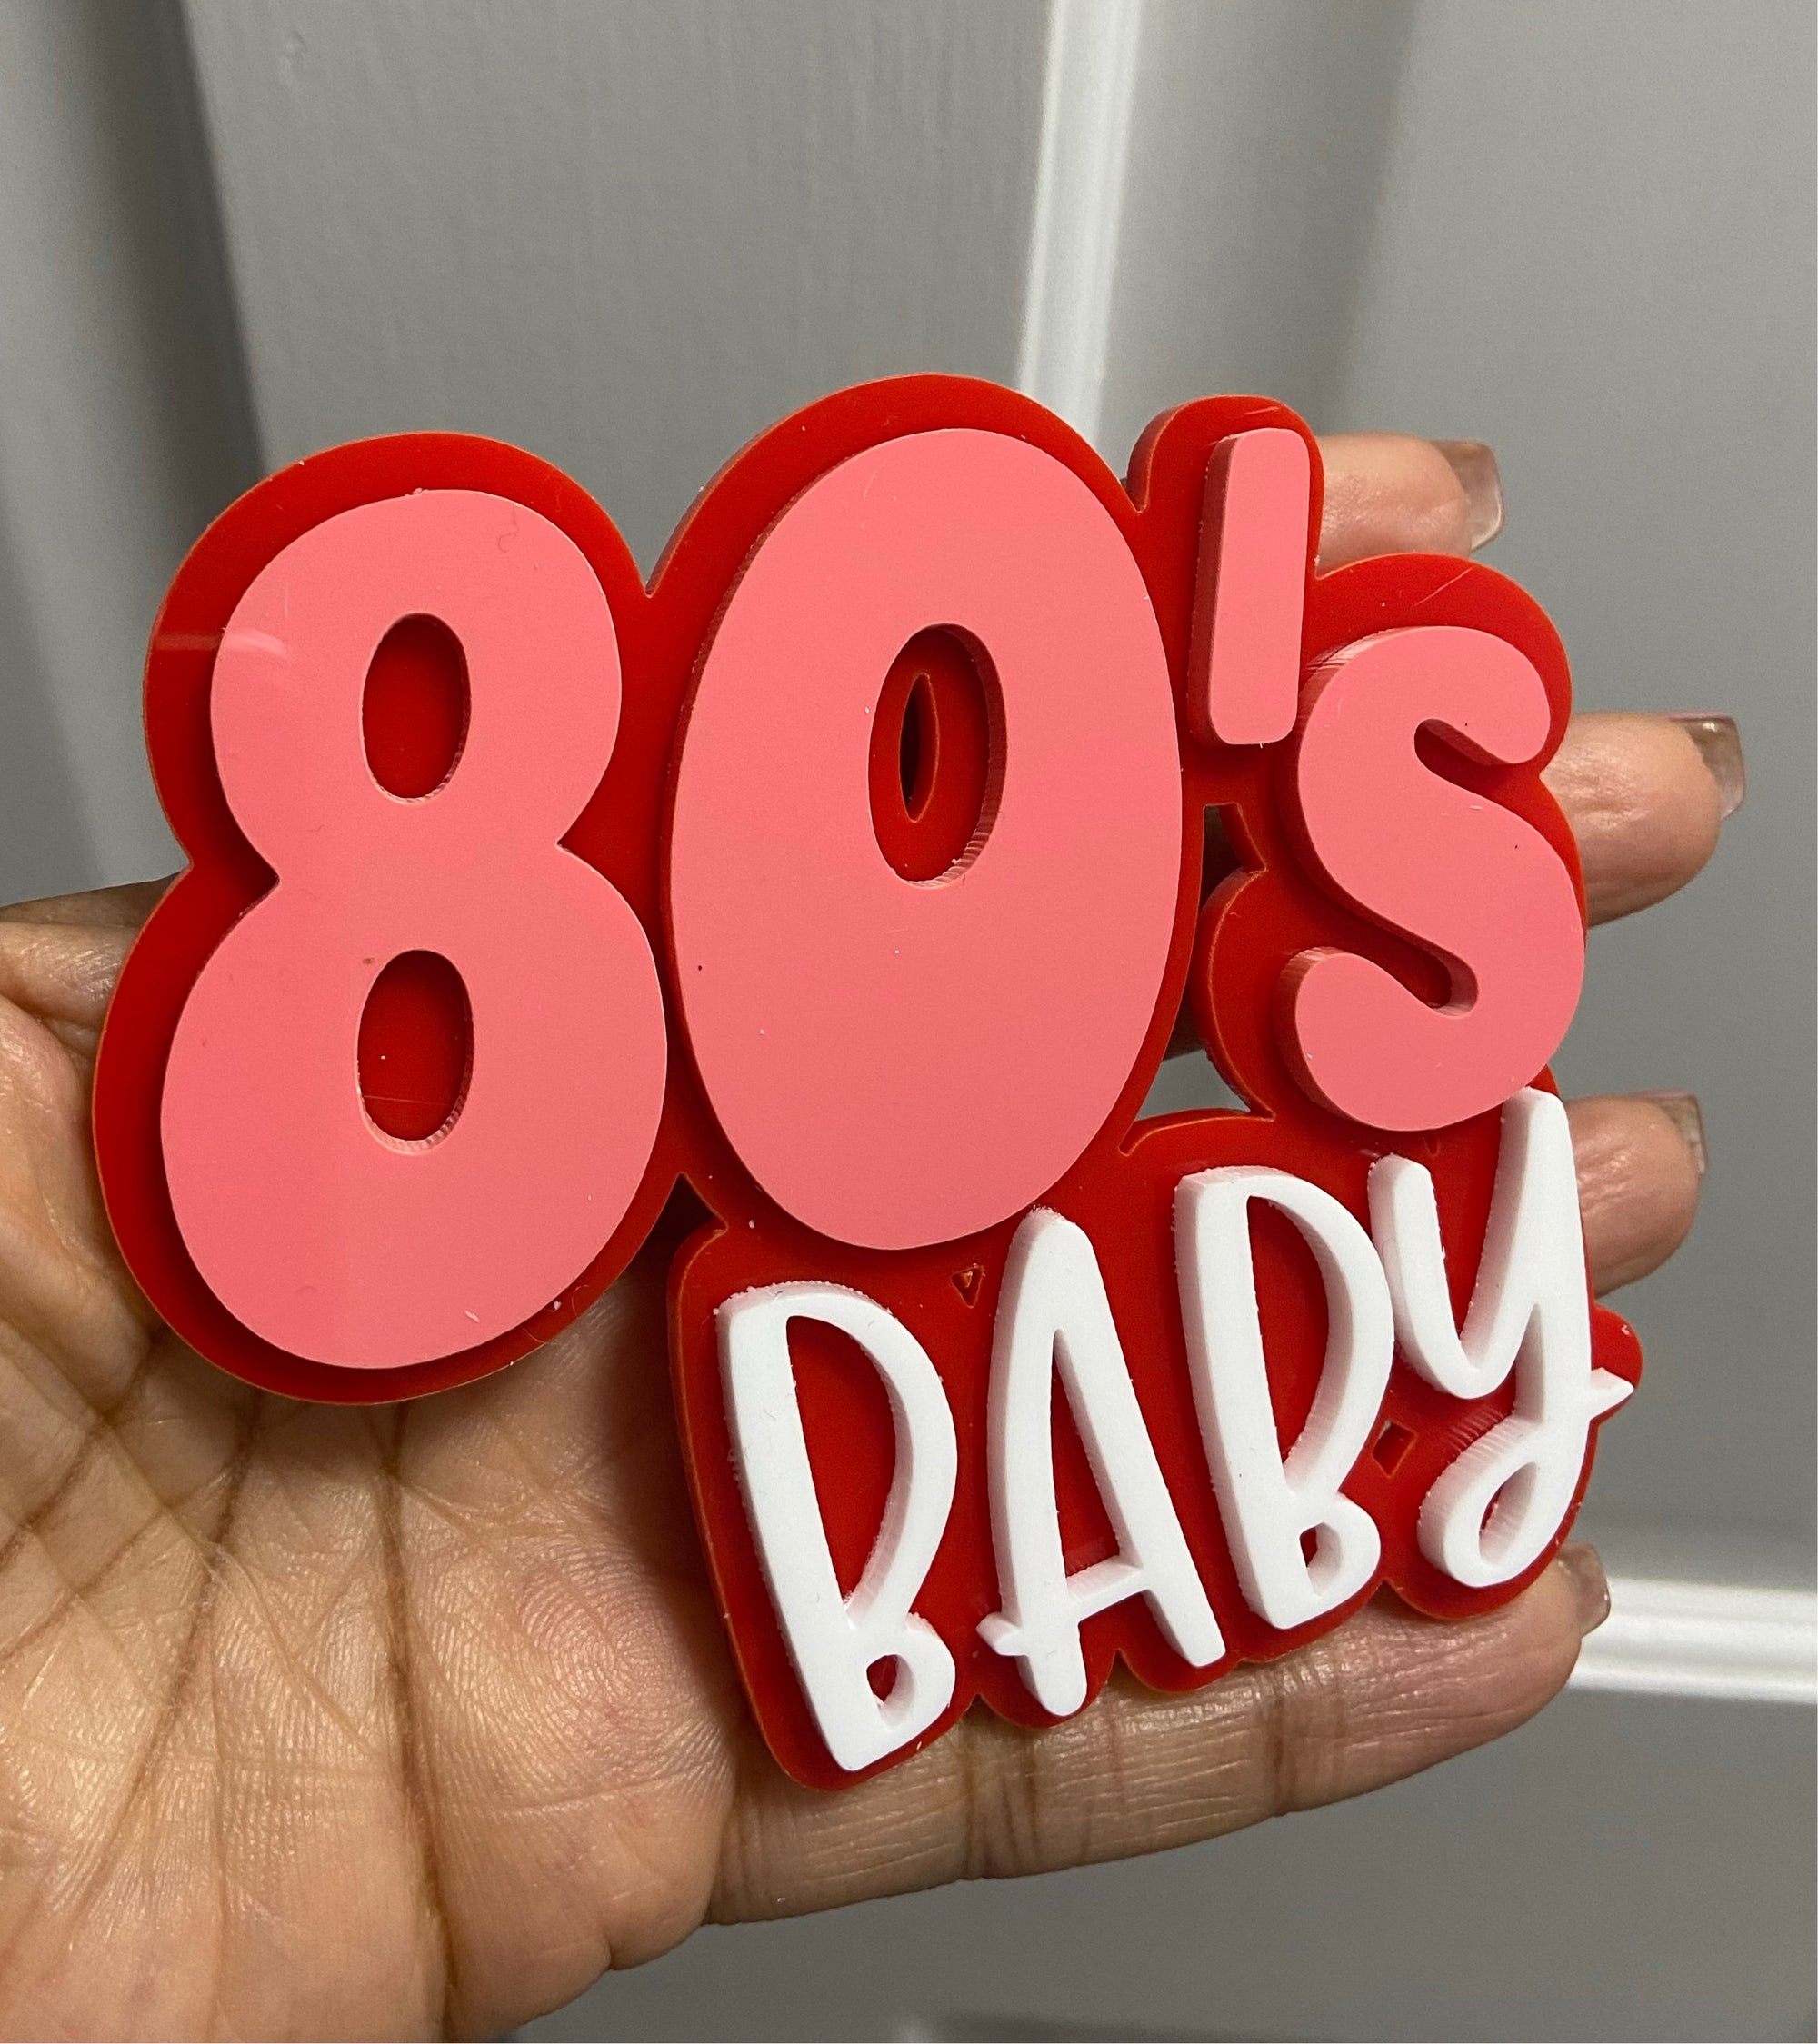 80's Baby Cake charm/topper